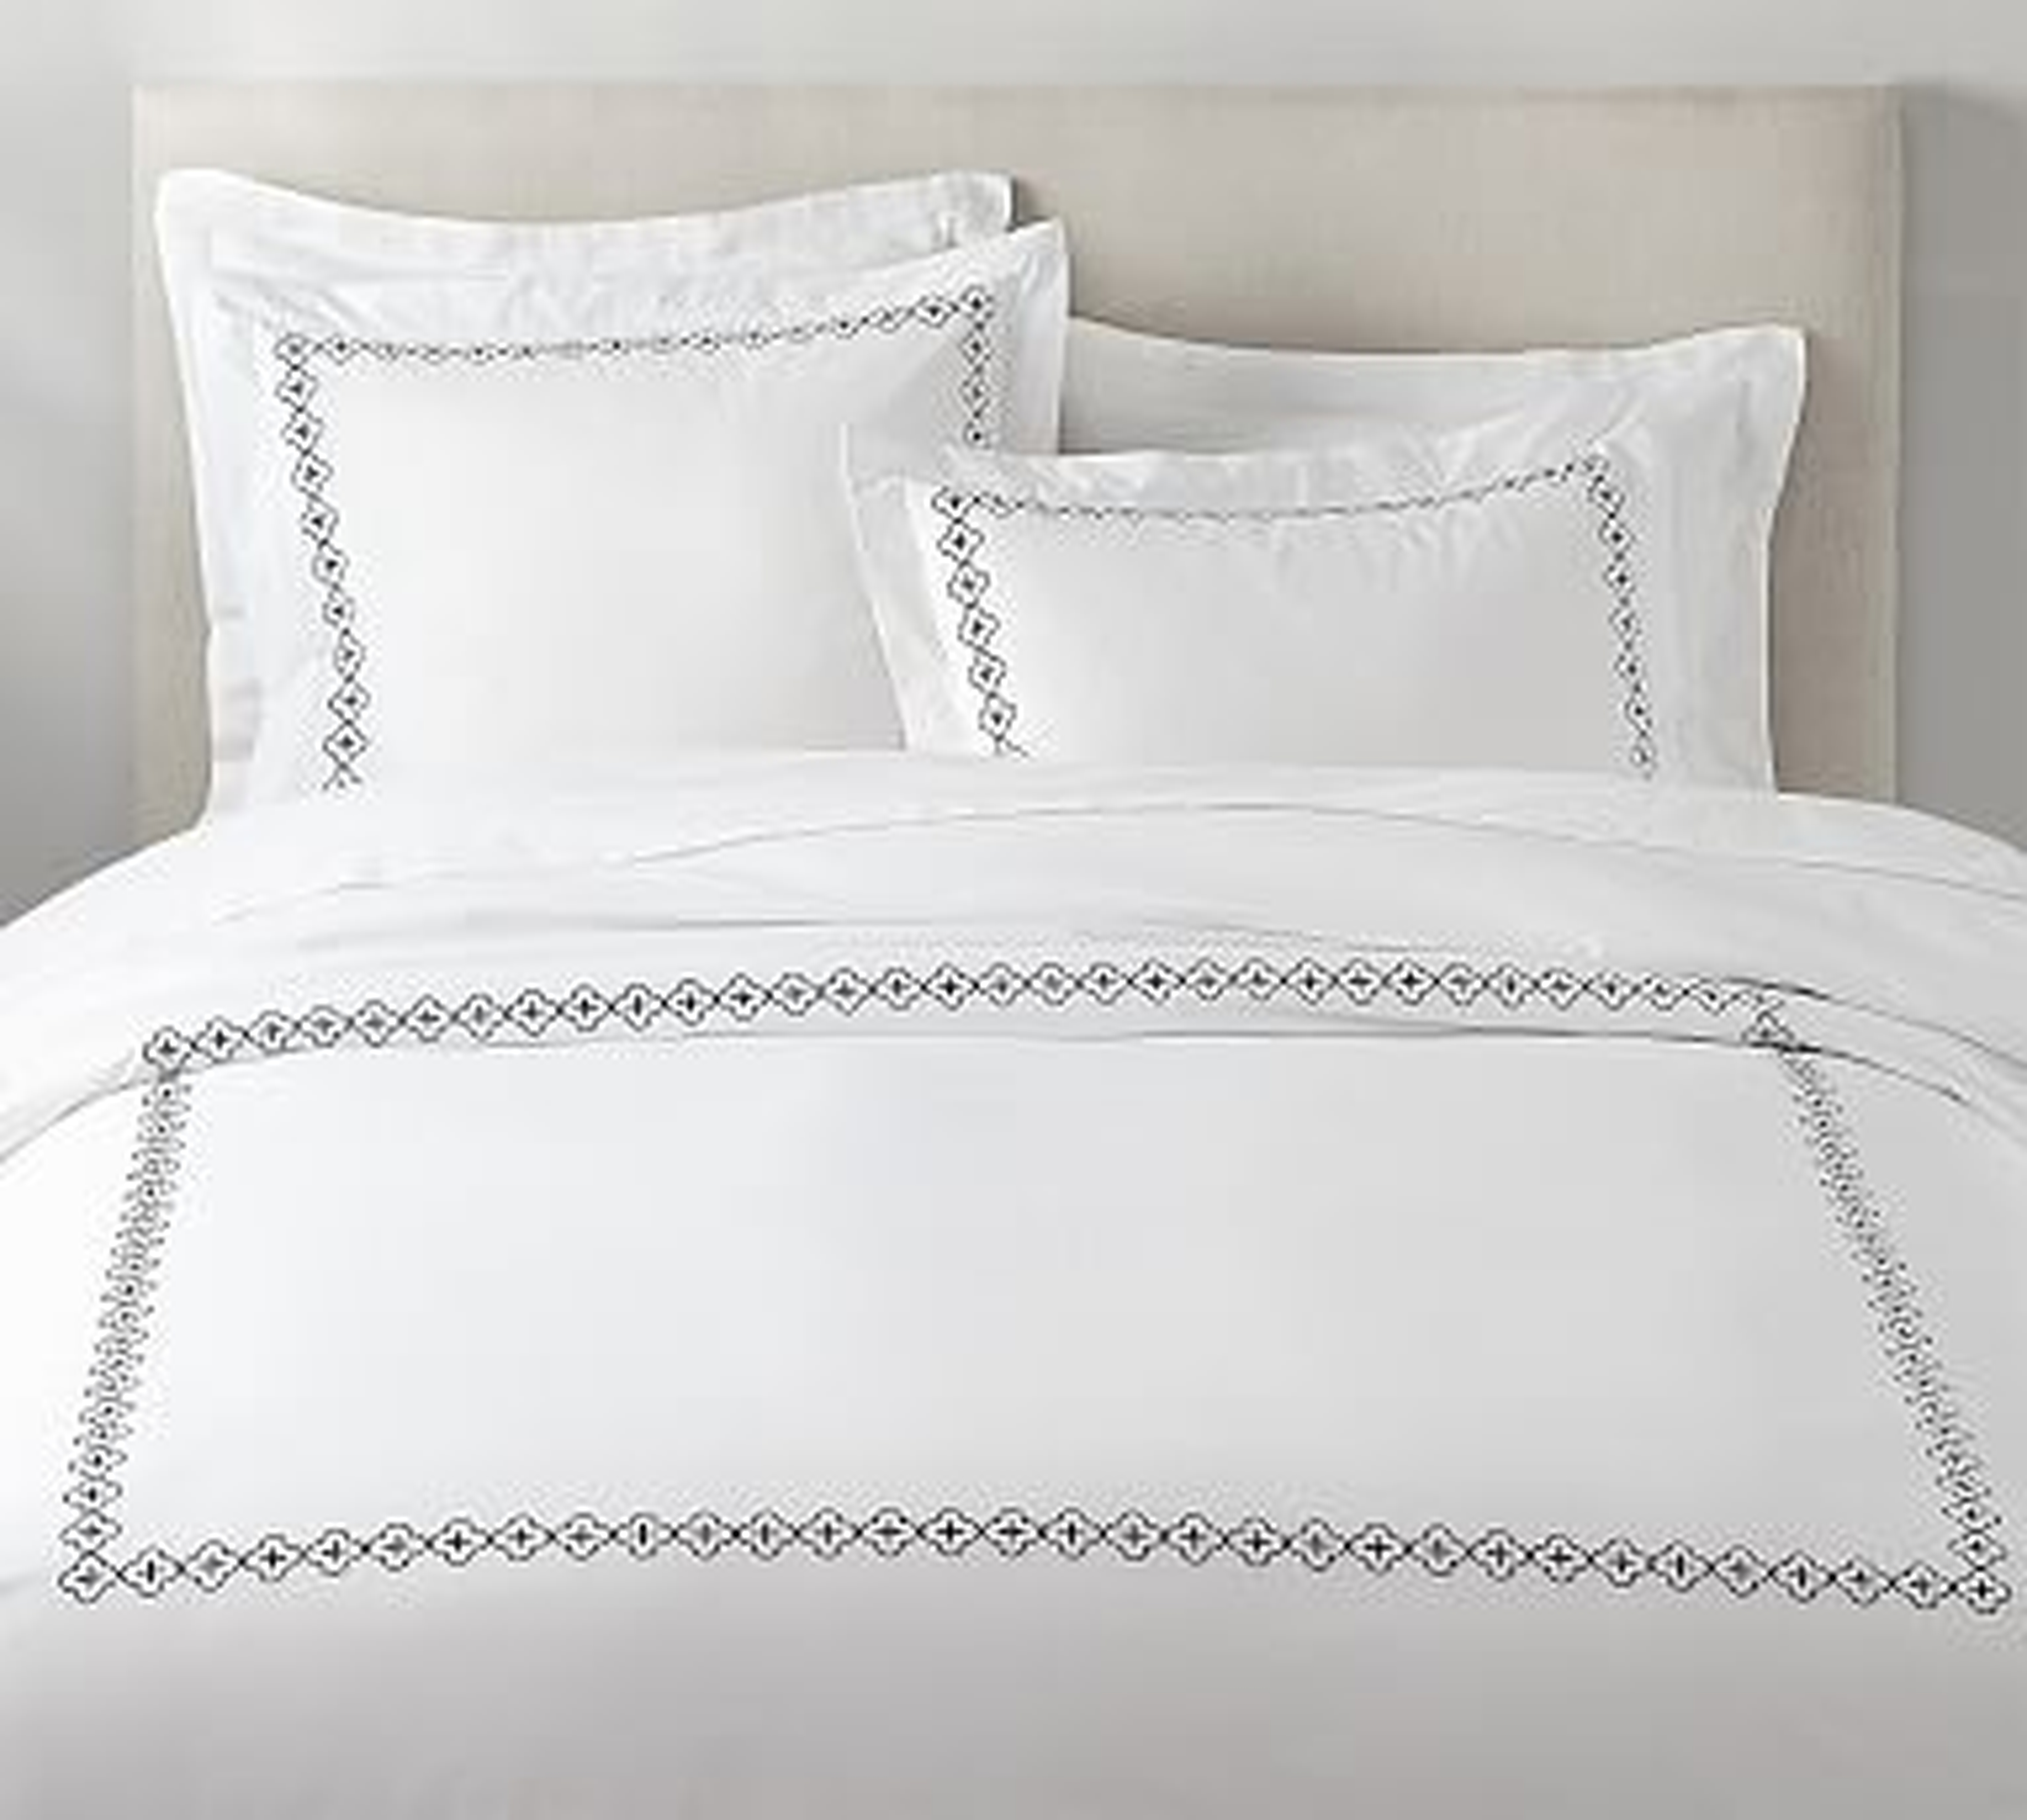 Trellis Embroidered Organic Duvet Cover, Twin, Midnight - Pottery Barn